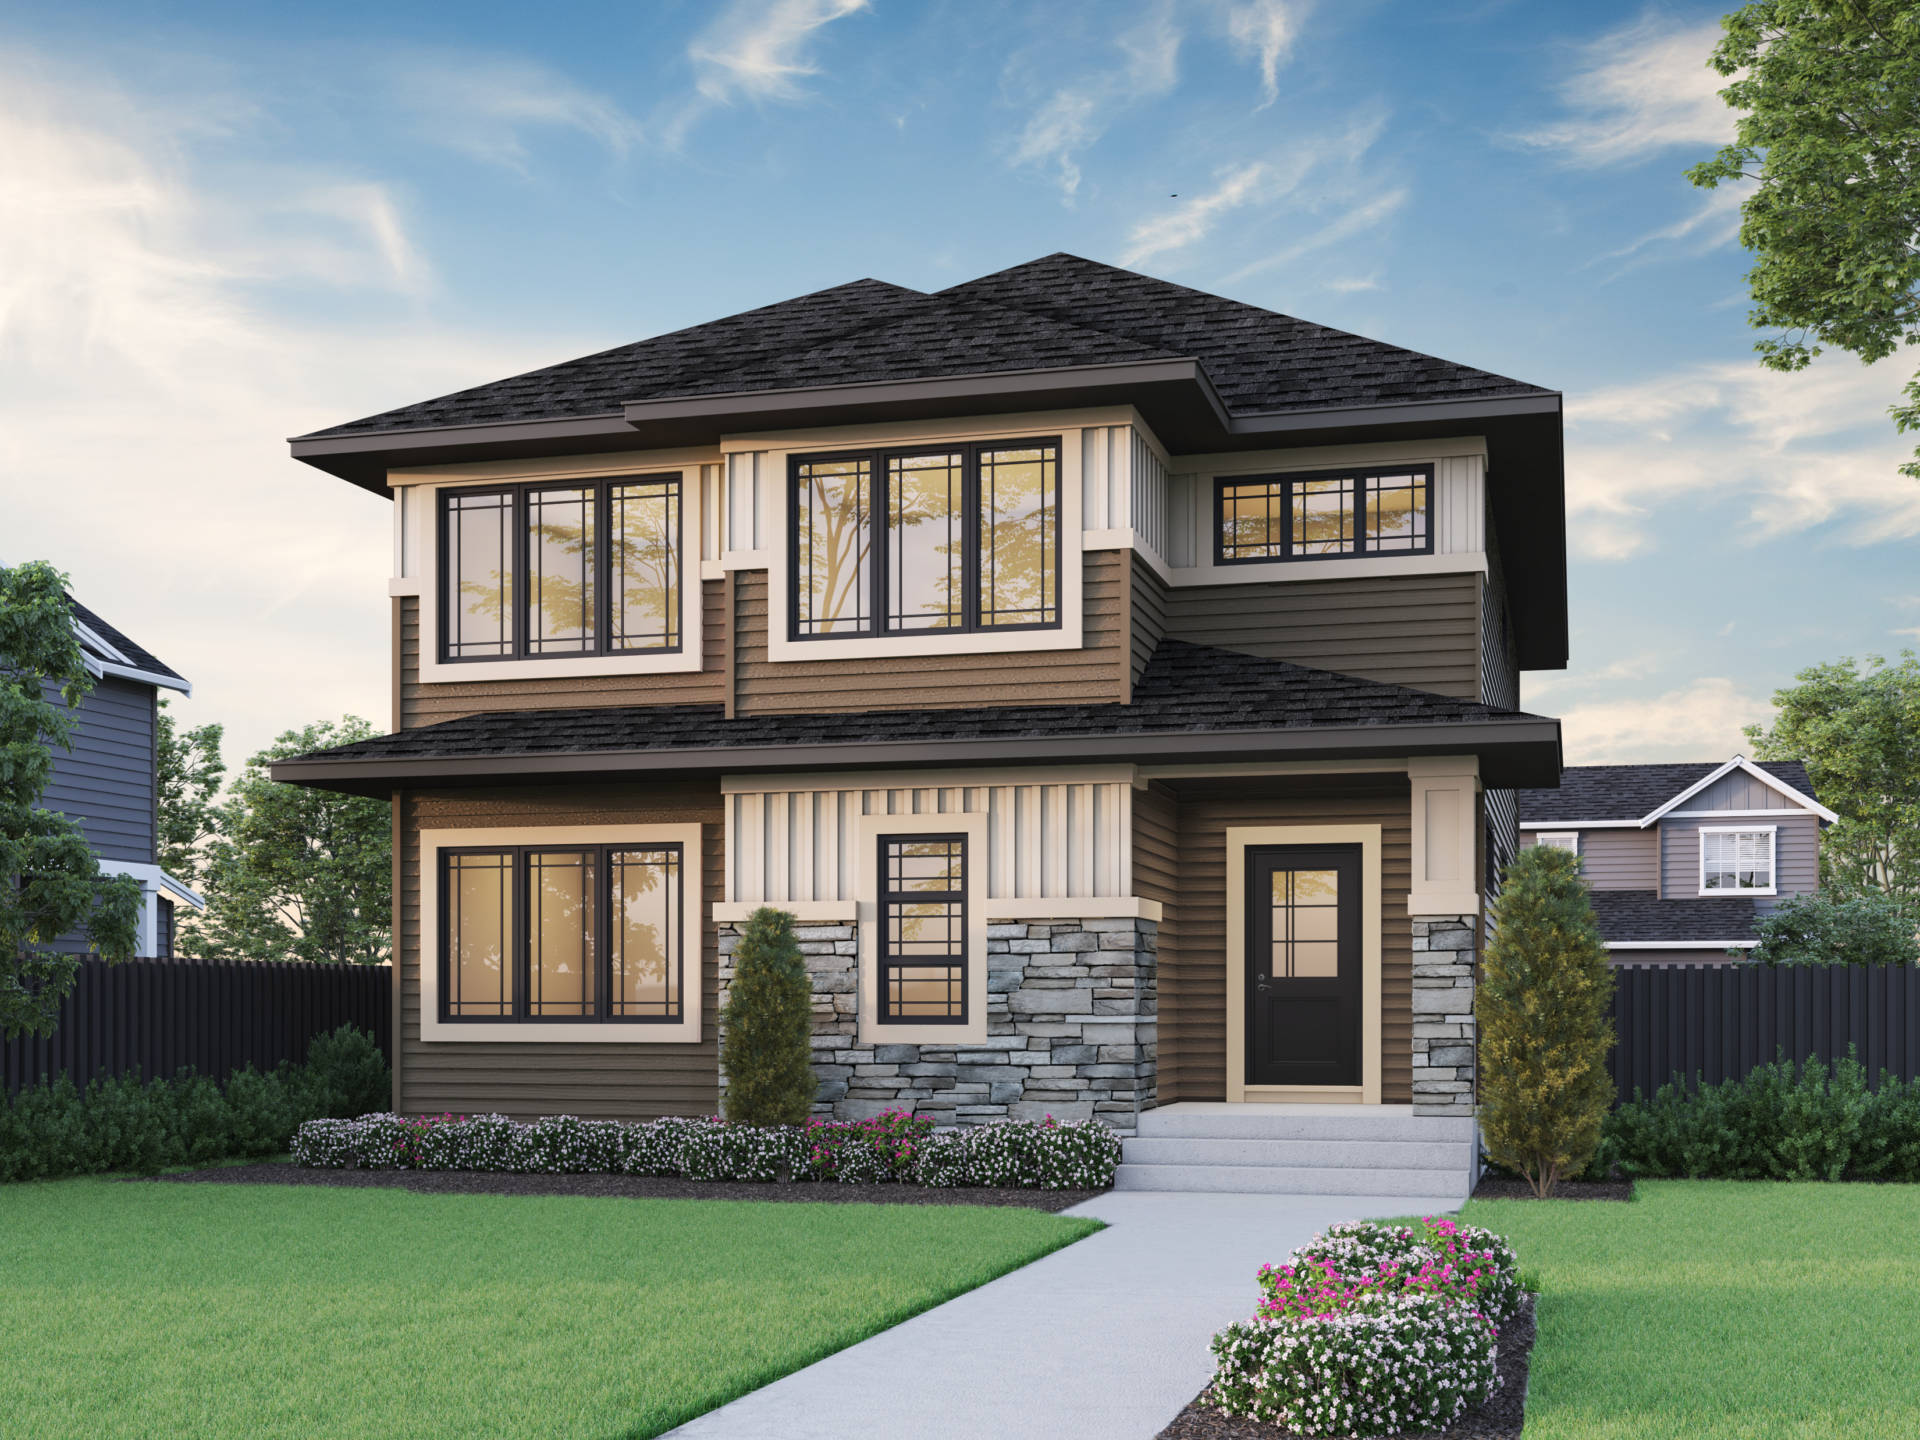 The Edgewood showhome in the community of Harmony.